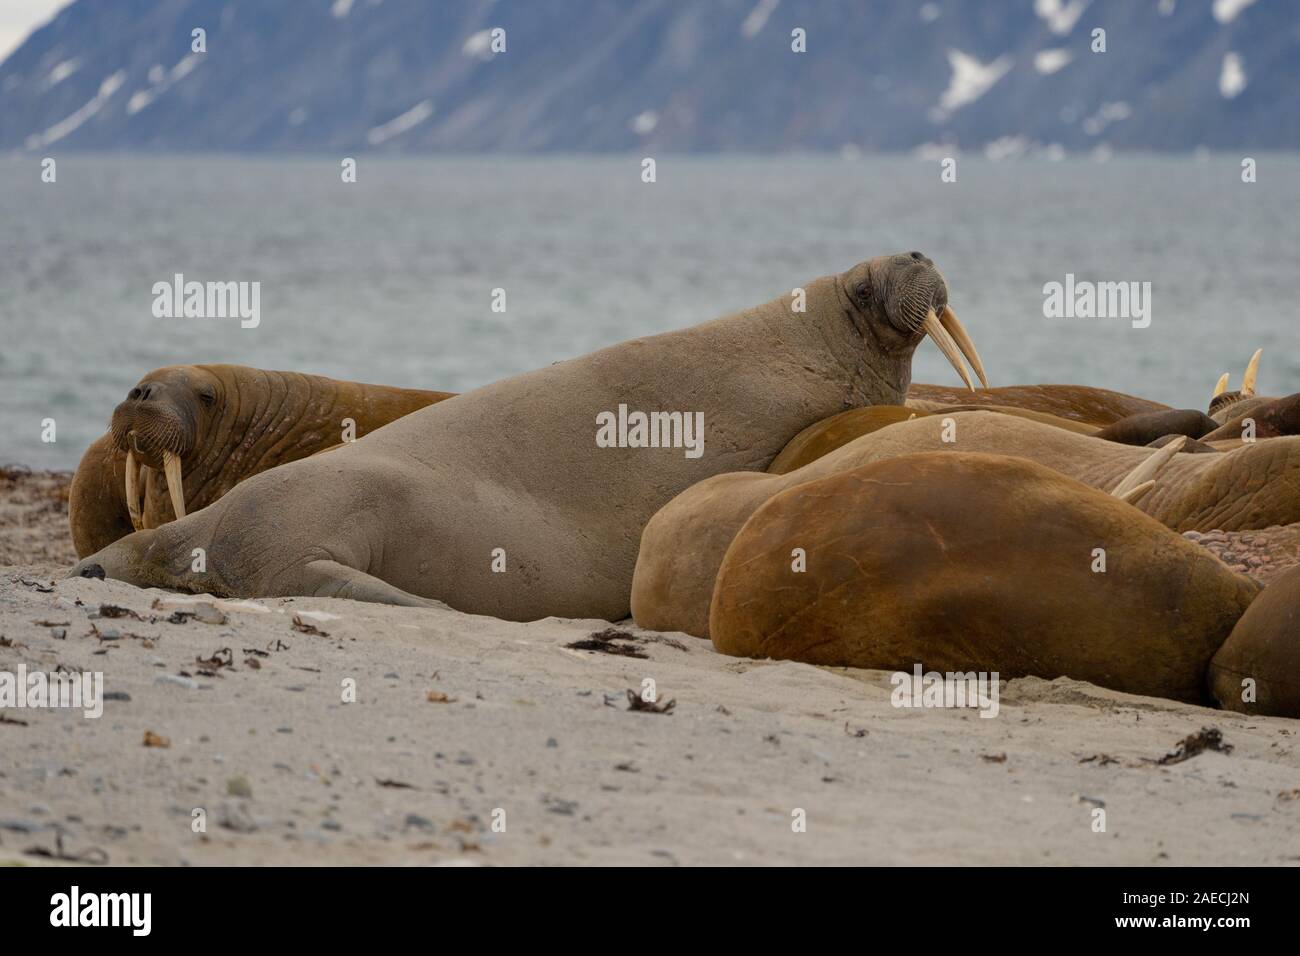 Atlantic walrus (Odobenus rosmarus rosmarus). This large, gregarious relative of the seal has tusks that can reach a metre in length. Both the male (b Stock Photo